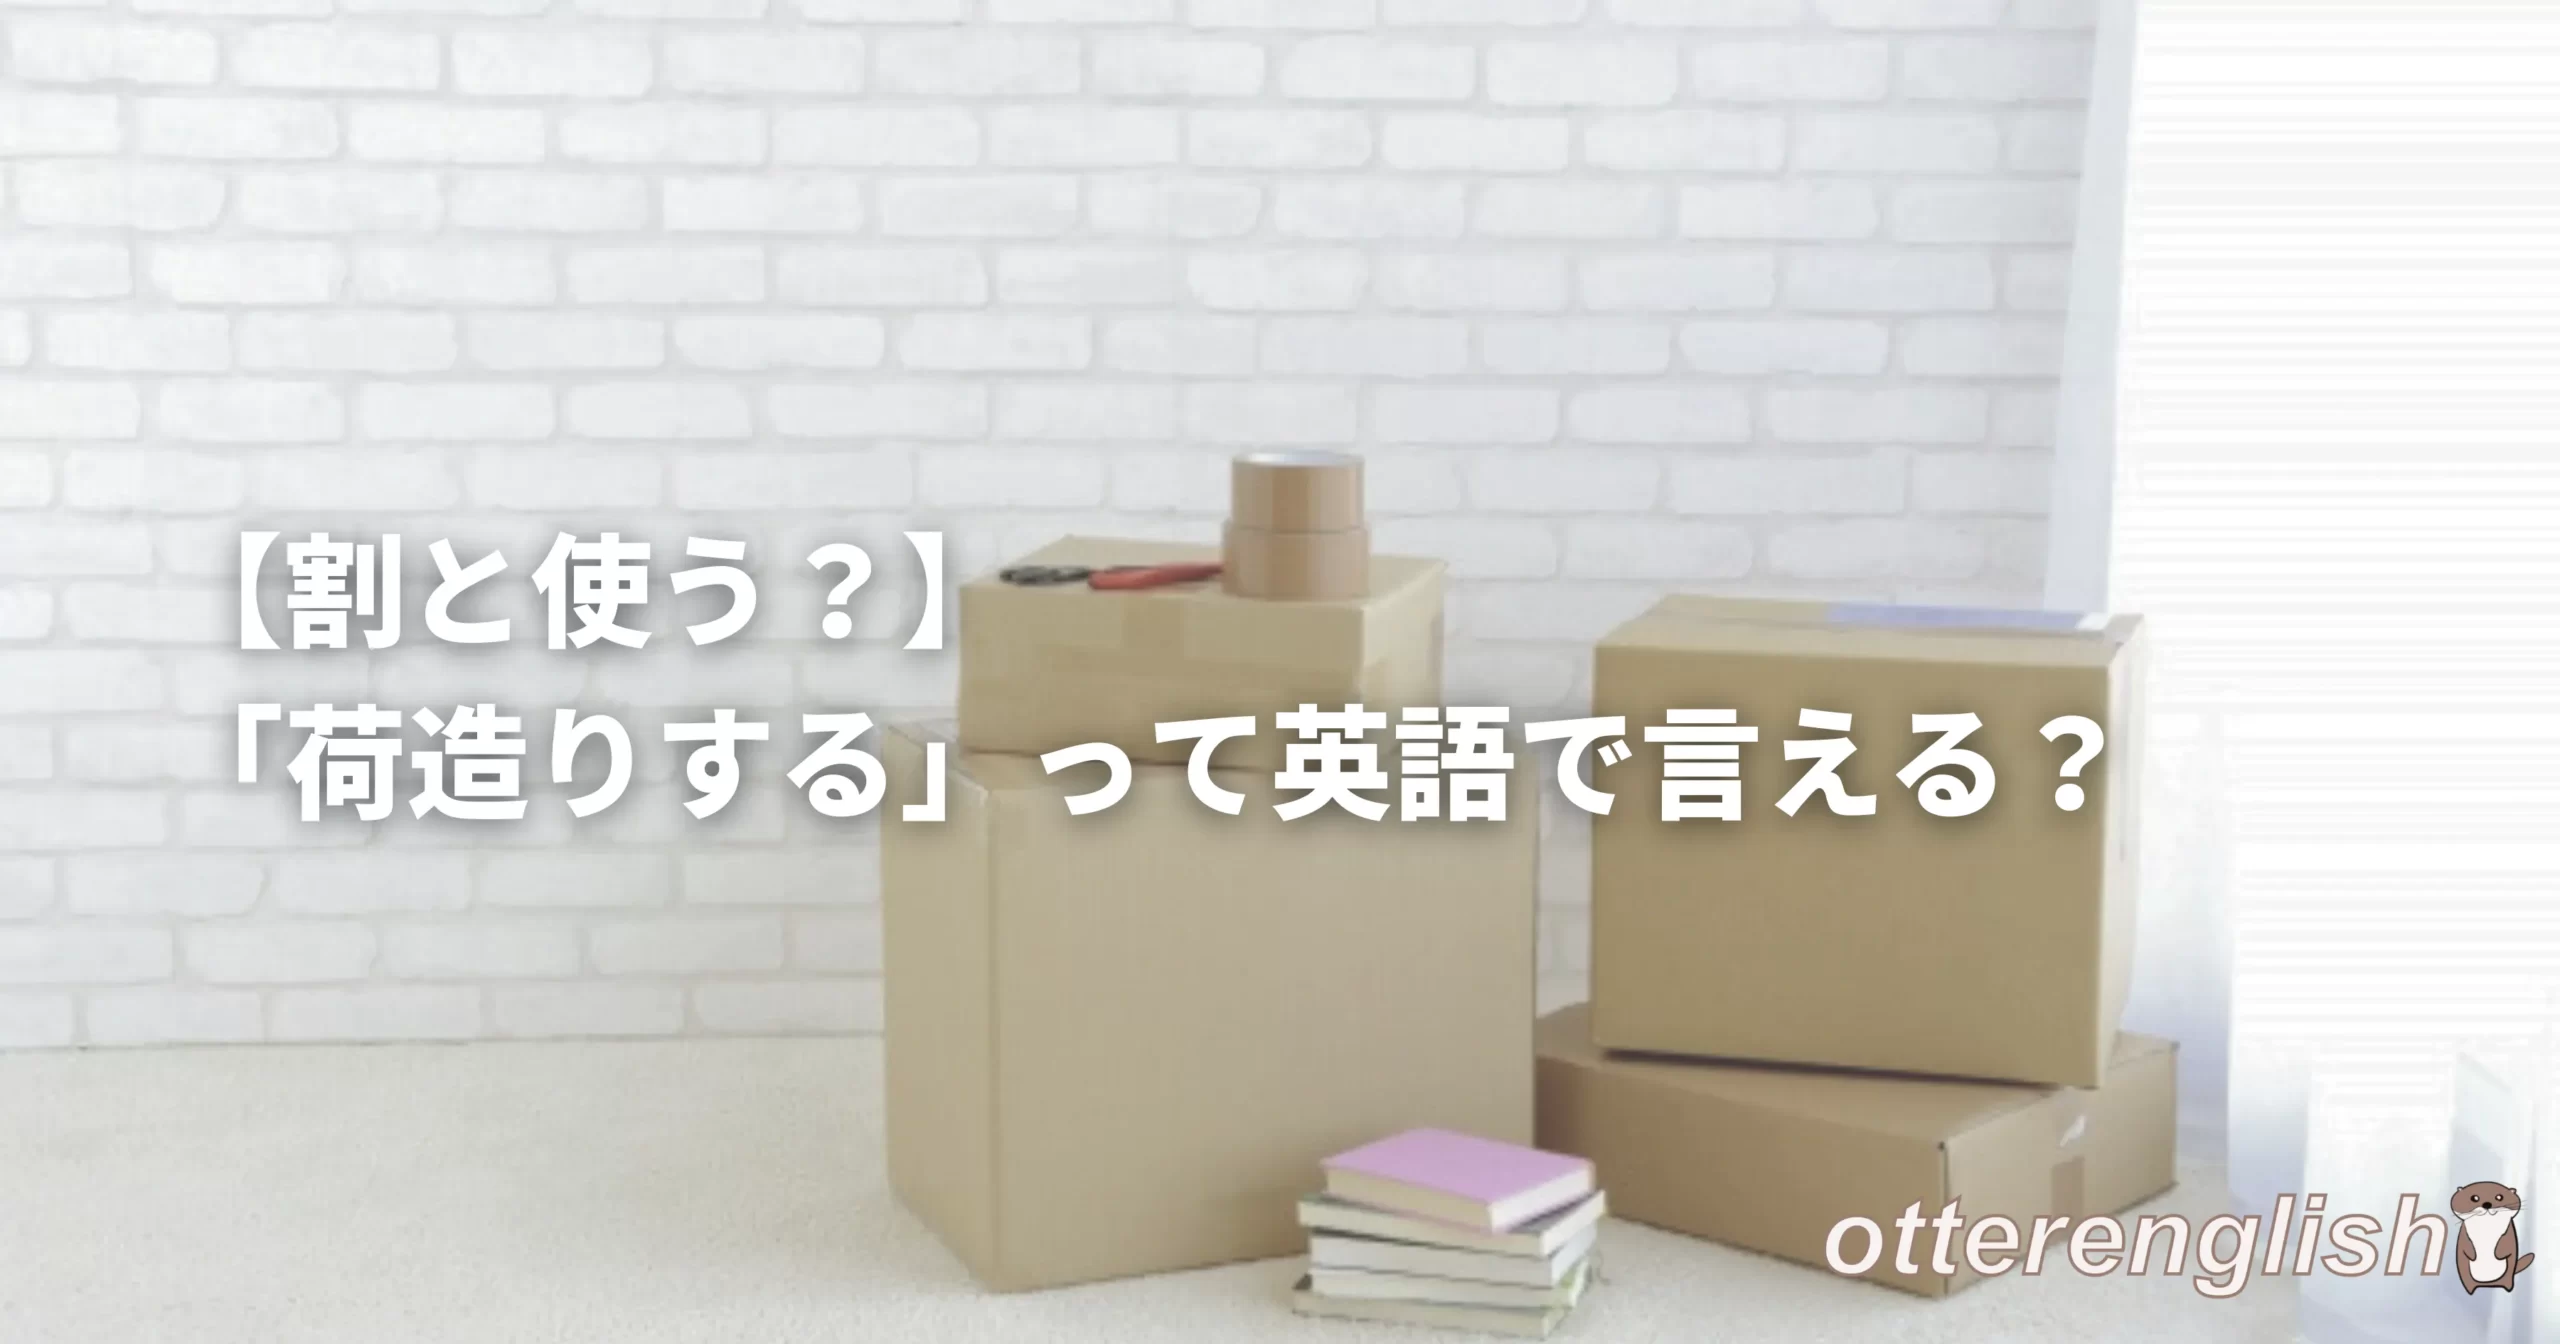 pack my things upを表した荷造りの画像